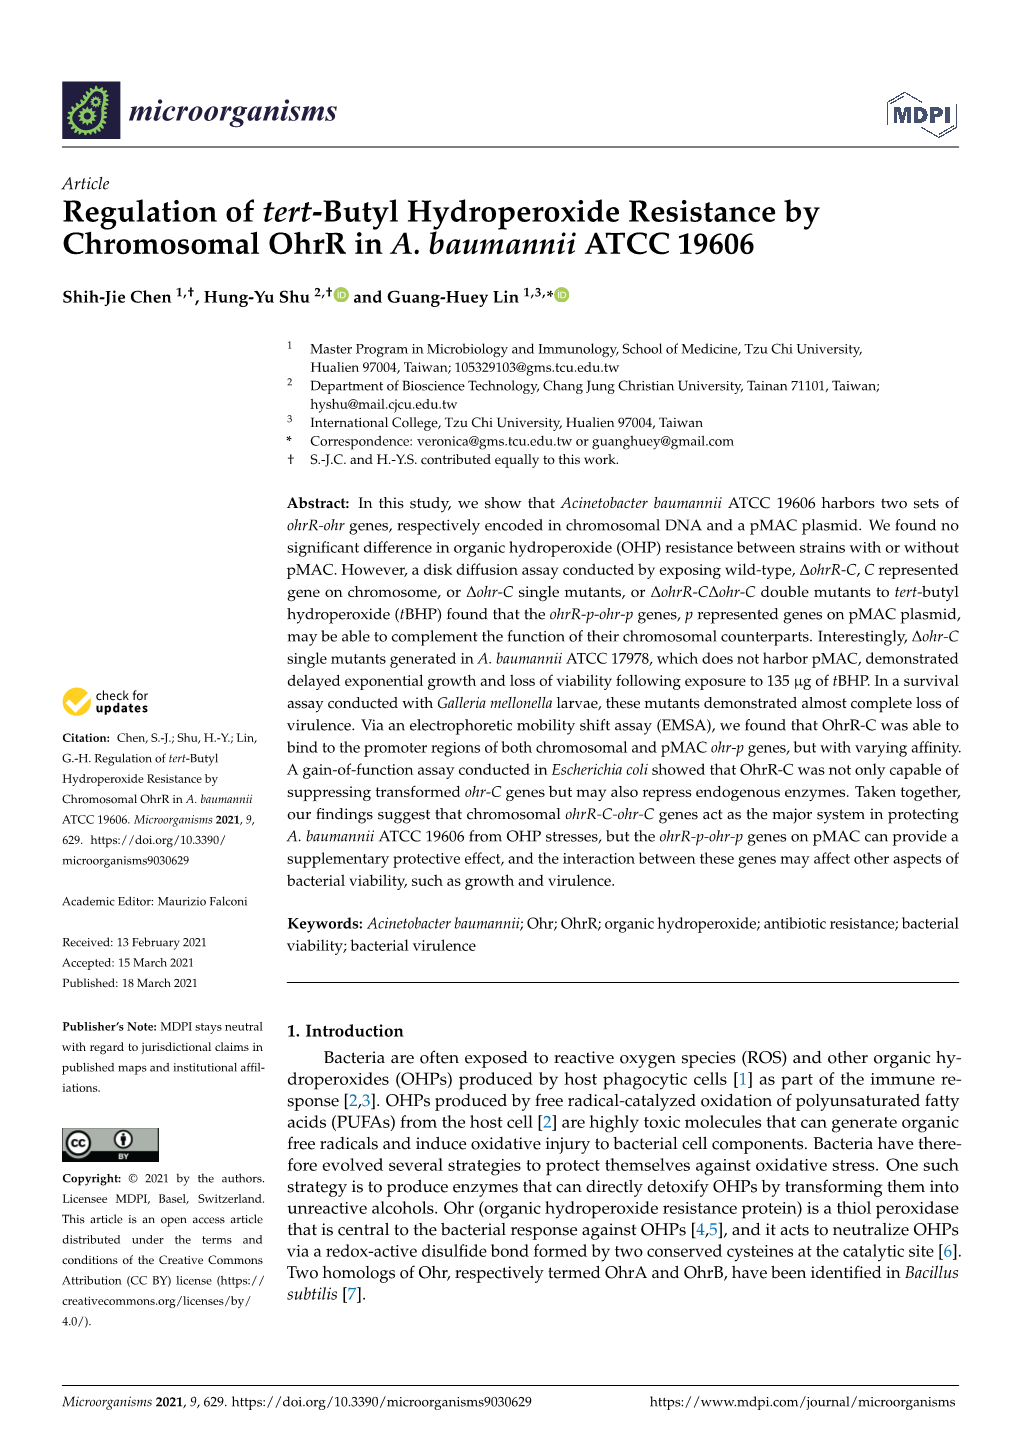 Regulation of Tert-Butyl Hydroperoxide Resistance by Chromosomal Ohrr in A